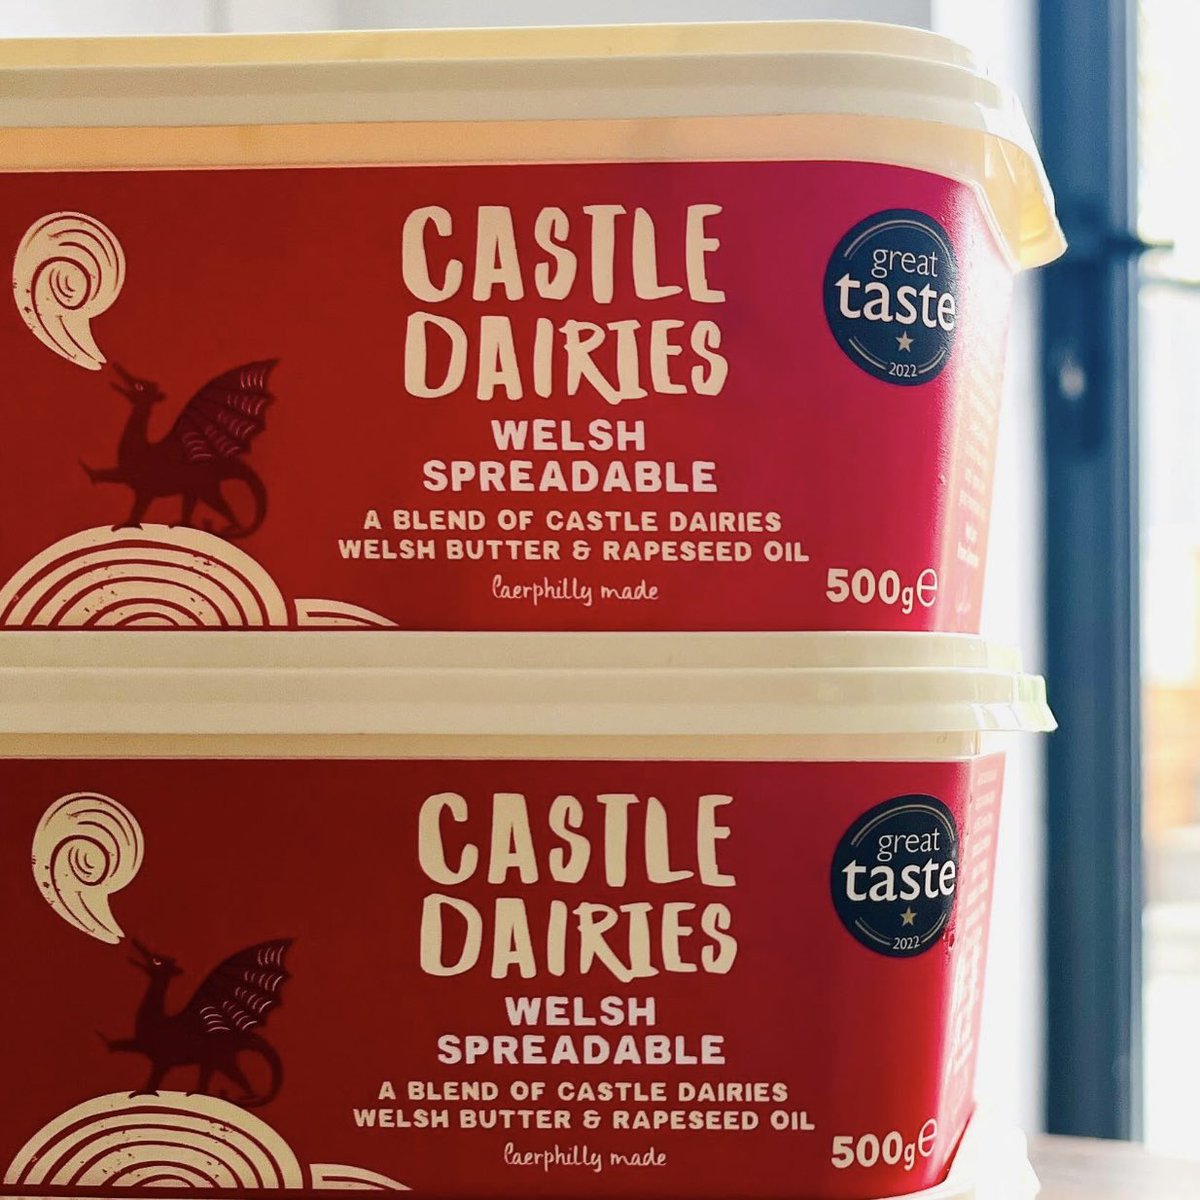 We’re back in @AldiUK by popular demand - as of Monday 6th May🙌🏽🥳 Pick up a tub this #bankholidaymonday & elevate your breakfast🍞🥓🍳🥞🧈 Wales stores only🏴󠁧󠁢󠁷󠁬󠁳󠁿. #castledairies #dairy #butter #spreadable #aldi #wales #bankholiday #bankholidaymonday #backbypopulardemand